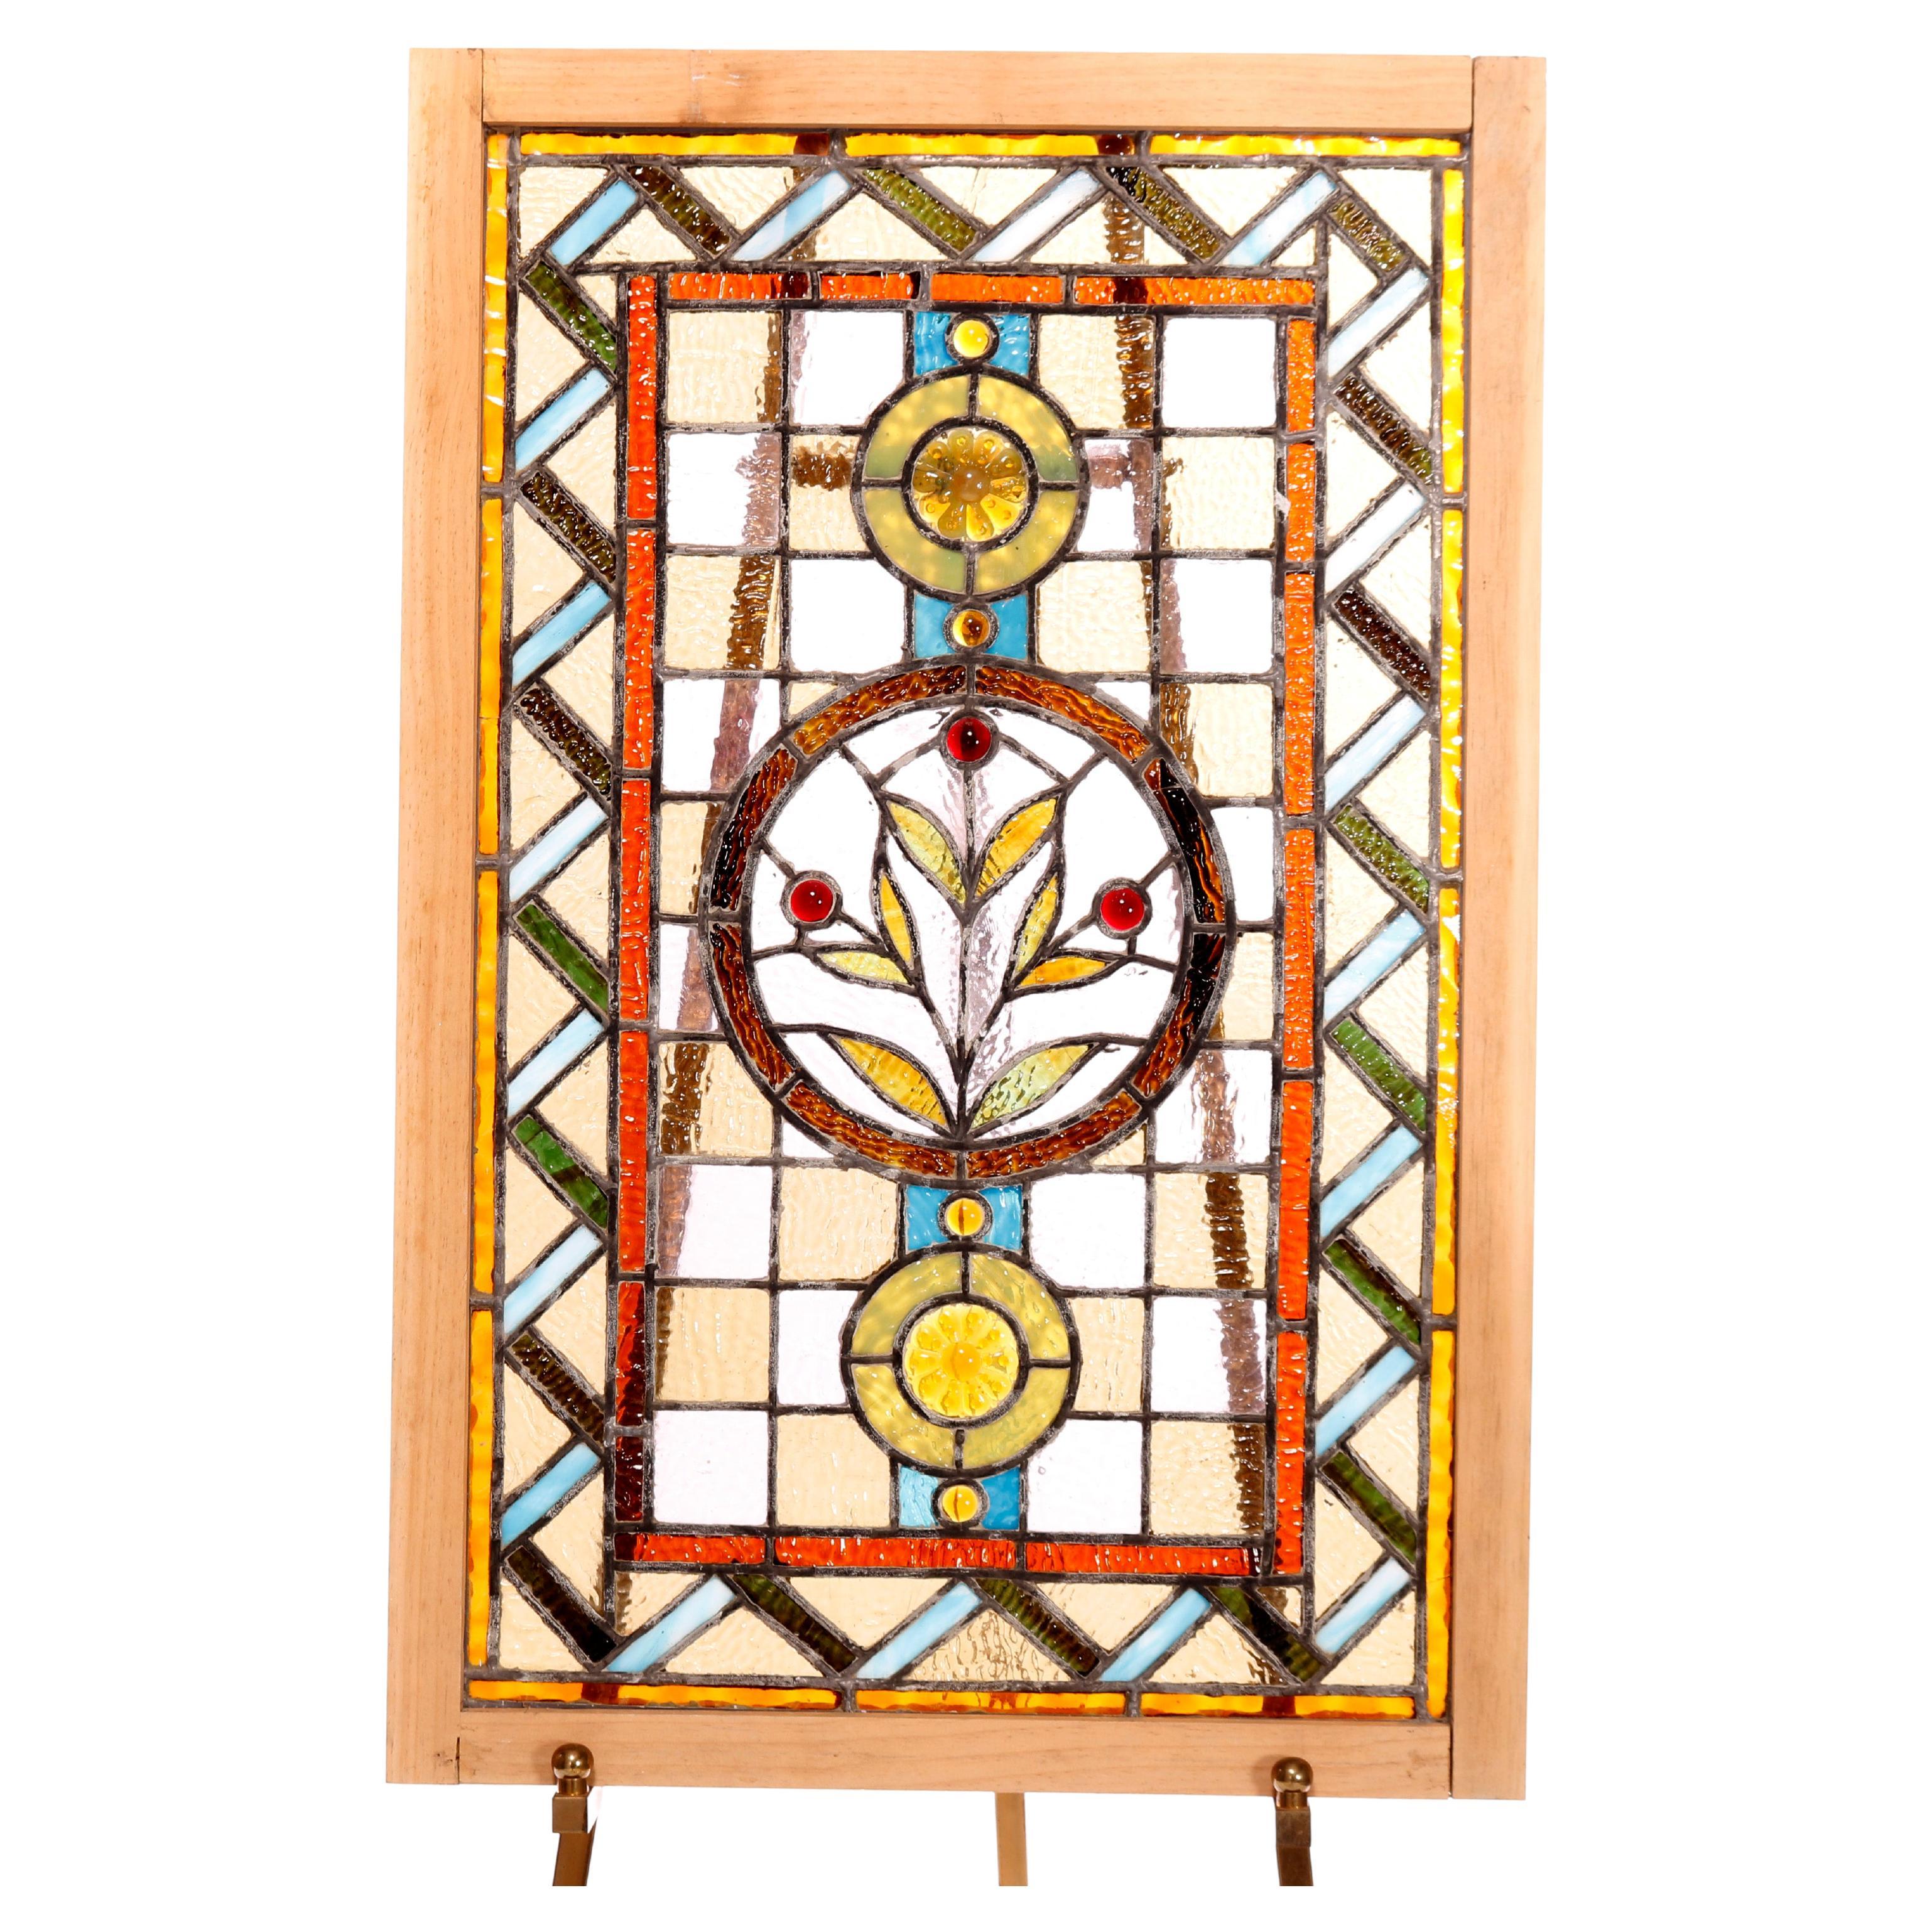 MIDSIZE OLD ENGLISH LEADED STAINED GLASS WINDOW Geometric Shield 22.75" x 18.25" 